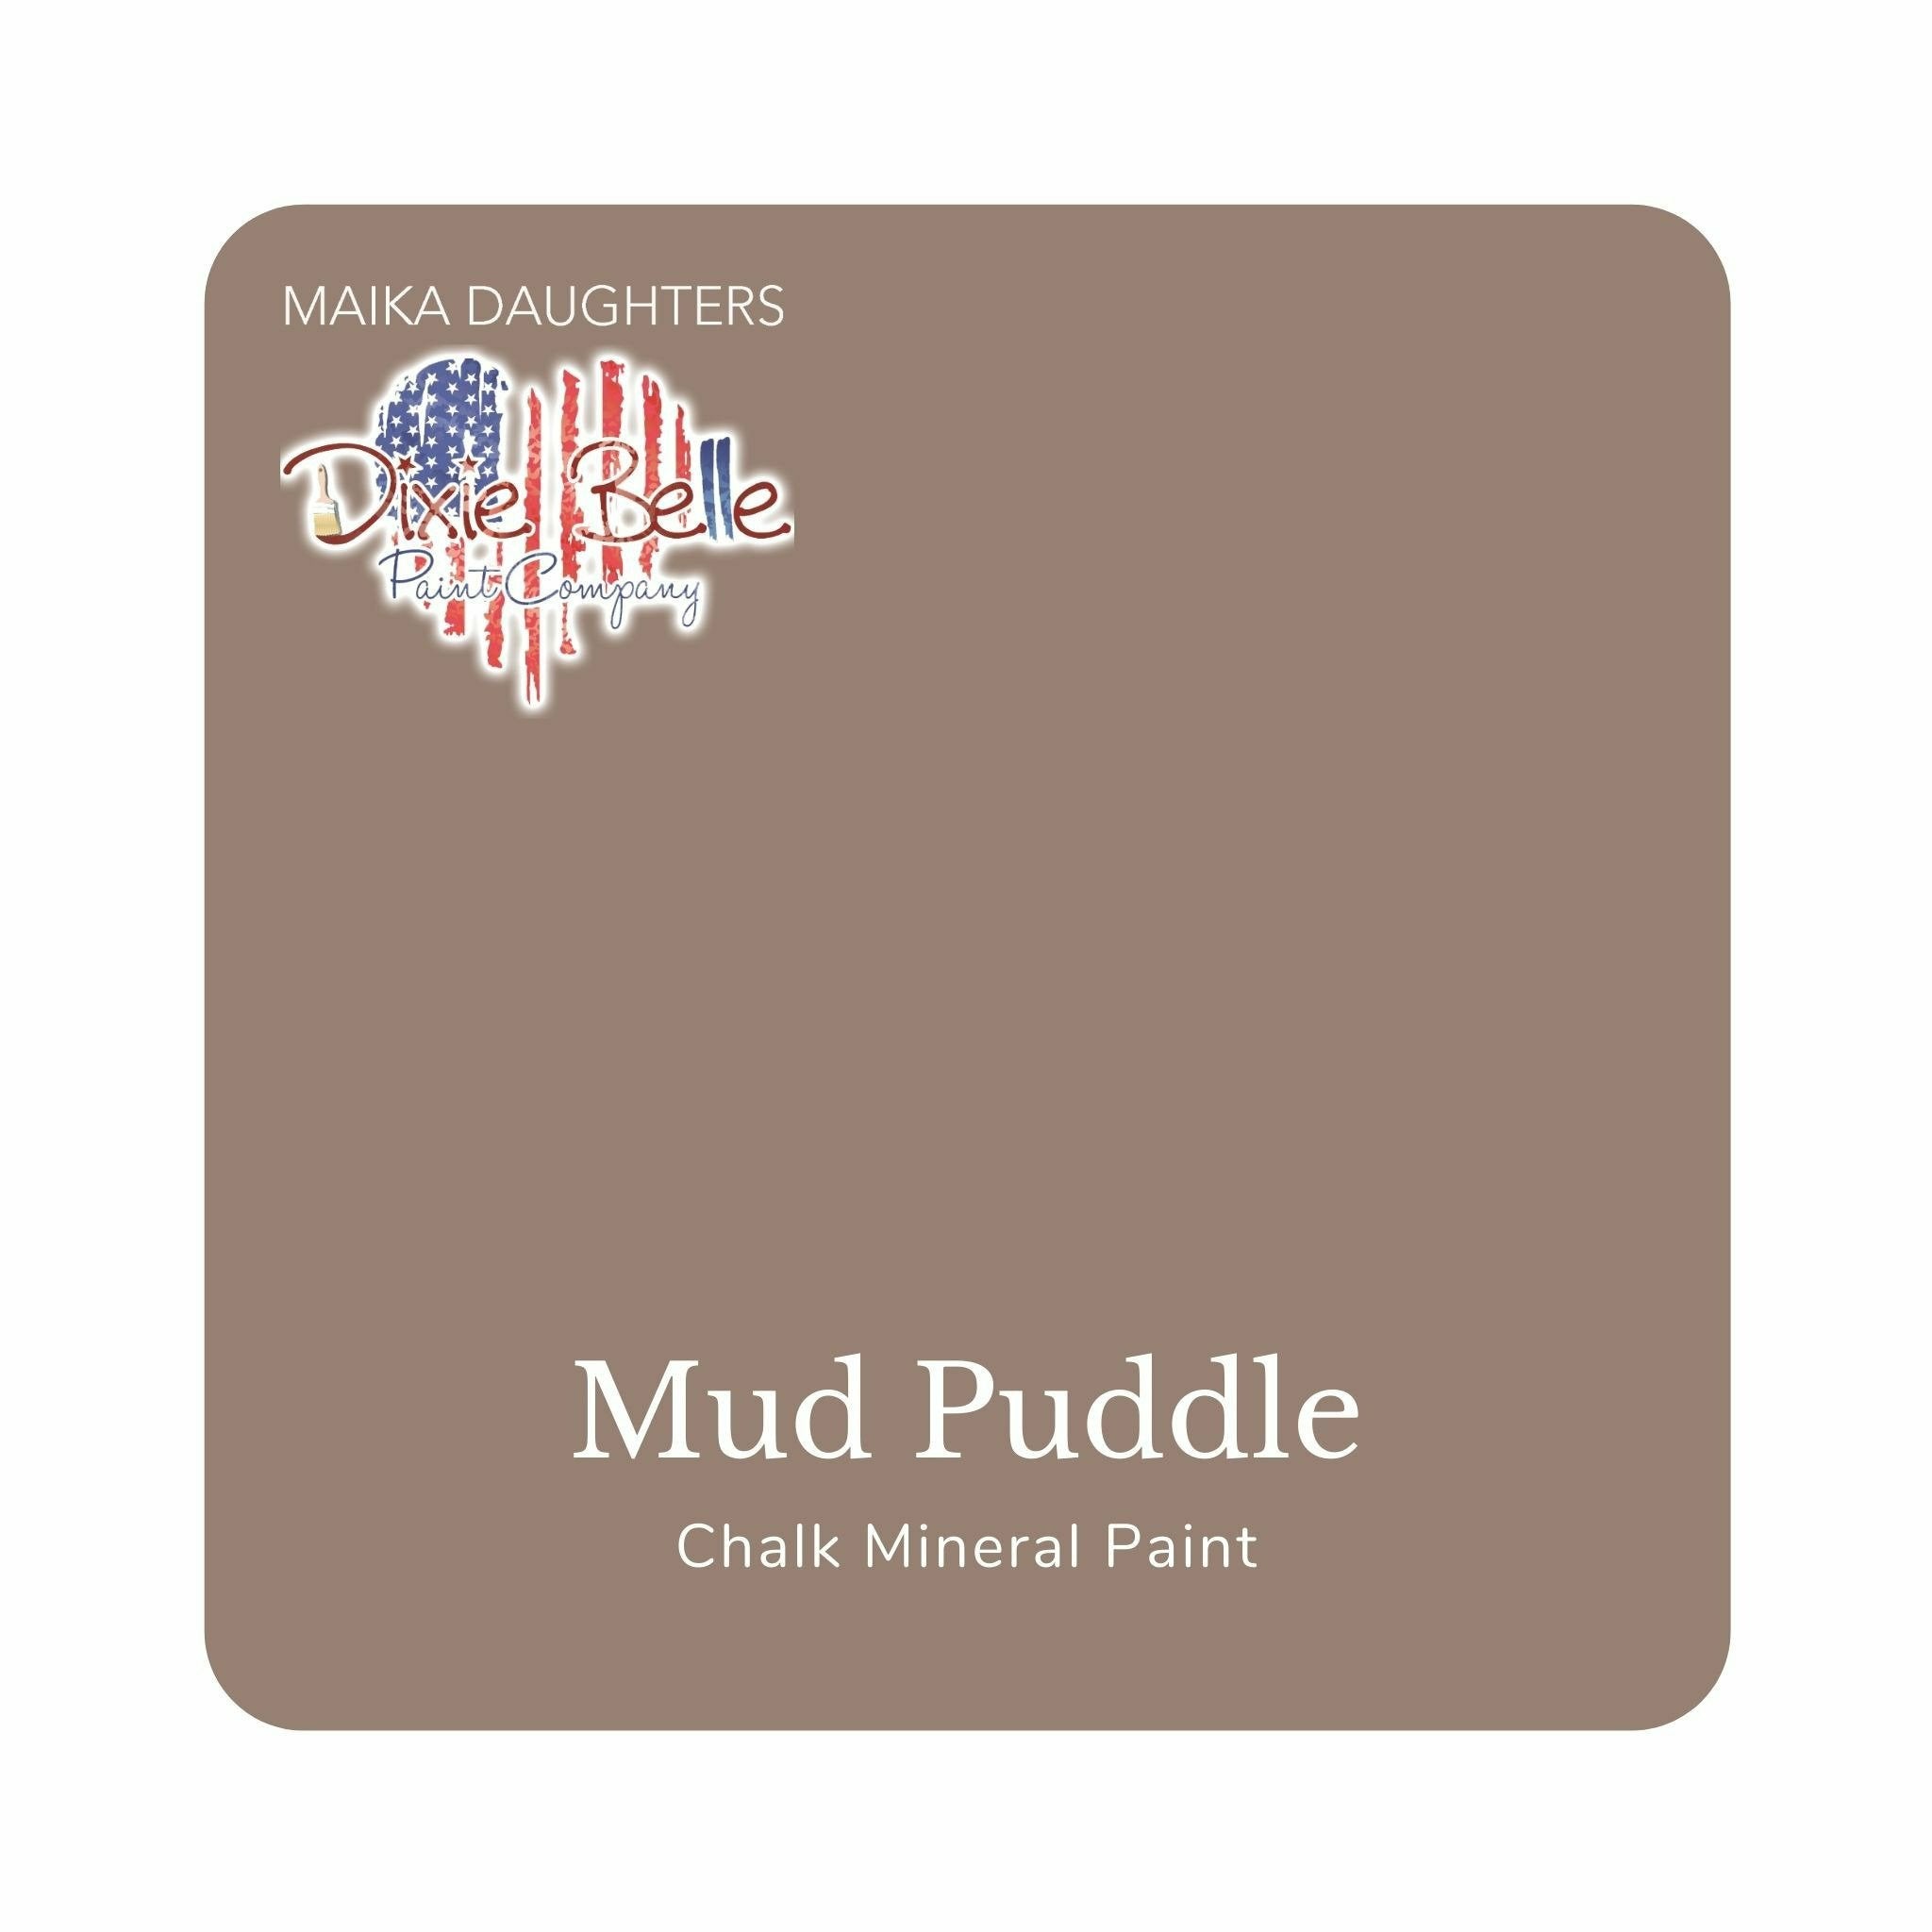 A square swatch card of Dixie Belle Paint Company’s Mud Puddle Chalk Mineral Paint is against a white background. This color is a warm taupe.